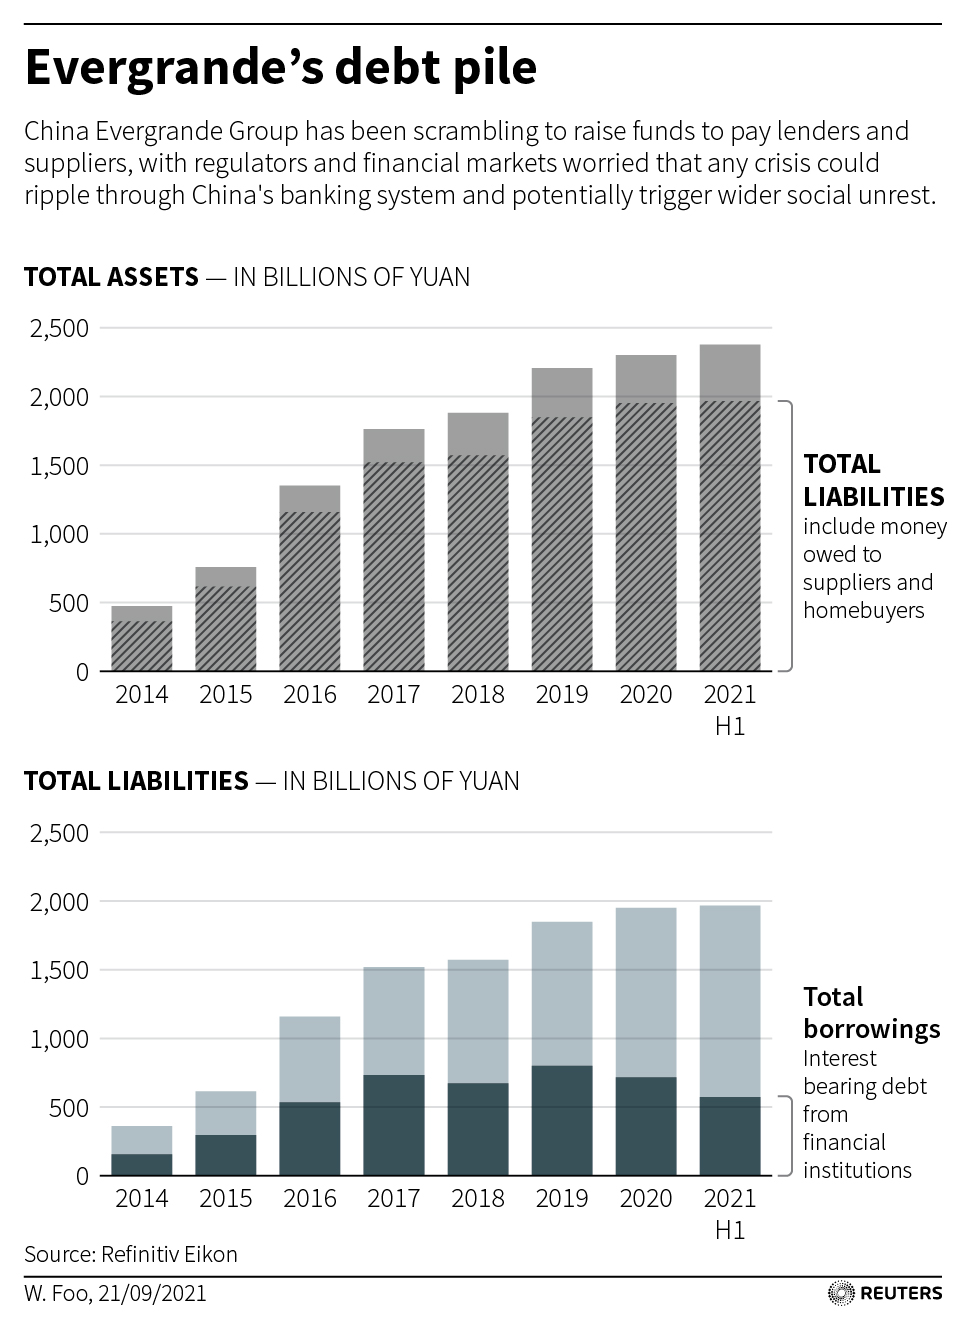 Charts comparing Evergrande's total assets, total liabilities and total borrowings .